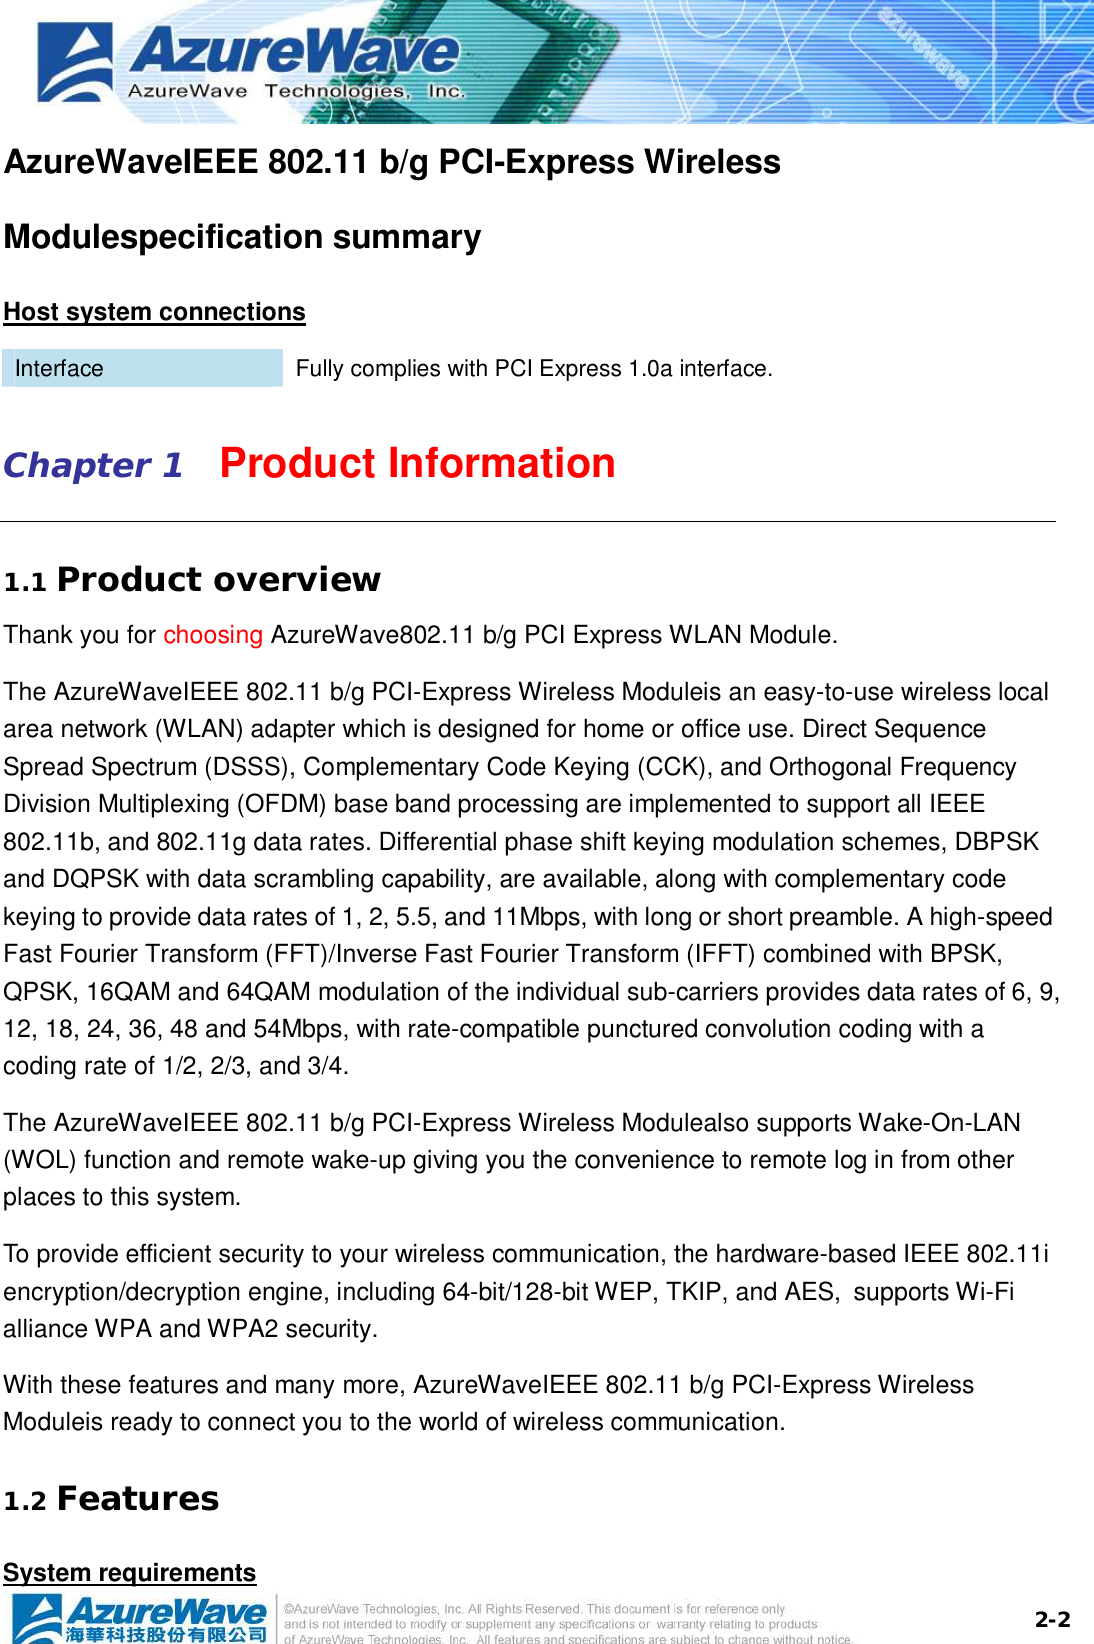  2-2AzureWaveIEEE 802.11 b/g PCI-Express Wireless Modulespecification summary Host system connections Interface  Fully complies with PCI Express 1.0a interface. Chapter 1   Product Information 1.1 Product overview Thank you for choosing AzureWave802.11 b/g PCI Express WLAN Module.  The AzureWaveIEEE 802.11 b/g PCI-Express Wireless Moduleis an easy-to-use wireless local area network (WLAN) adapter which is designed for home or office use. Direct Sequence Spread Spectrum (DSSS), Complementary Code Keying (CCK), and Orthogonal Frequency Division Multiplexing (OFDM) base band processing are implemented to support all IEEE 802.11b, and 802.11g data rates. Differential phase shift keying modulation schemes, DBPSK and DQPSK with data scrambling capability, are available, along with complementary code keying to provide data rates of 1, 2, 5.5, and 11Mbps, with long or short preamble. A high-speed Fast Fourier Transform (FFT)/Inverse Fast Fourier Transform (IFFT) combined with BPSK, QPSK, 16QAM and 64QAM modulation of the individual sub-carriers provides data rates of 6, 9, 12, 18, 24, 36, 48 and 54Mbps, with rate-compatible punctured convolution coding with a coding rate of 1/2, 2/3, and 3/4.  The AzureWaveIEEE 802.11 b/g PCI-Express Wireless Modulealso supports Wake-On-LAN (WOL) function and remote wake-up giving you the convenience to remote log in from other places to this system.   To provide efficient security to your wireless communication, the hardware-based IEEE 802.11i encryption/decryption engine, including 64-bit/128-bit WEP, TKIP, and AES, supports Wi-Fi alliance WPA and WPA2 security. With these features and many more, AzureWaveIEEE 802.11 b/g PCI-Express Wireless Moduleis ready to connect you to the world of wireless communication. 1.2 Features System requirements 